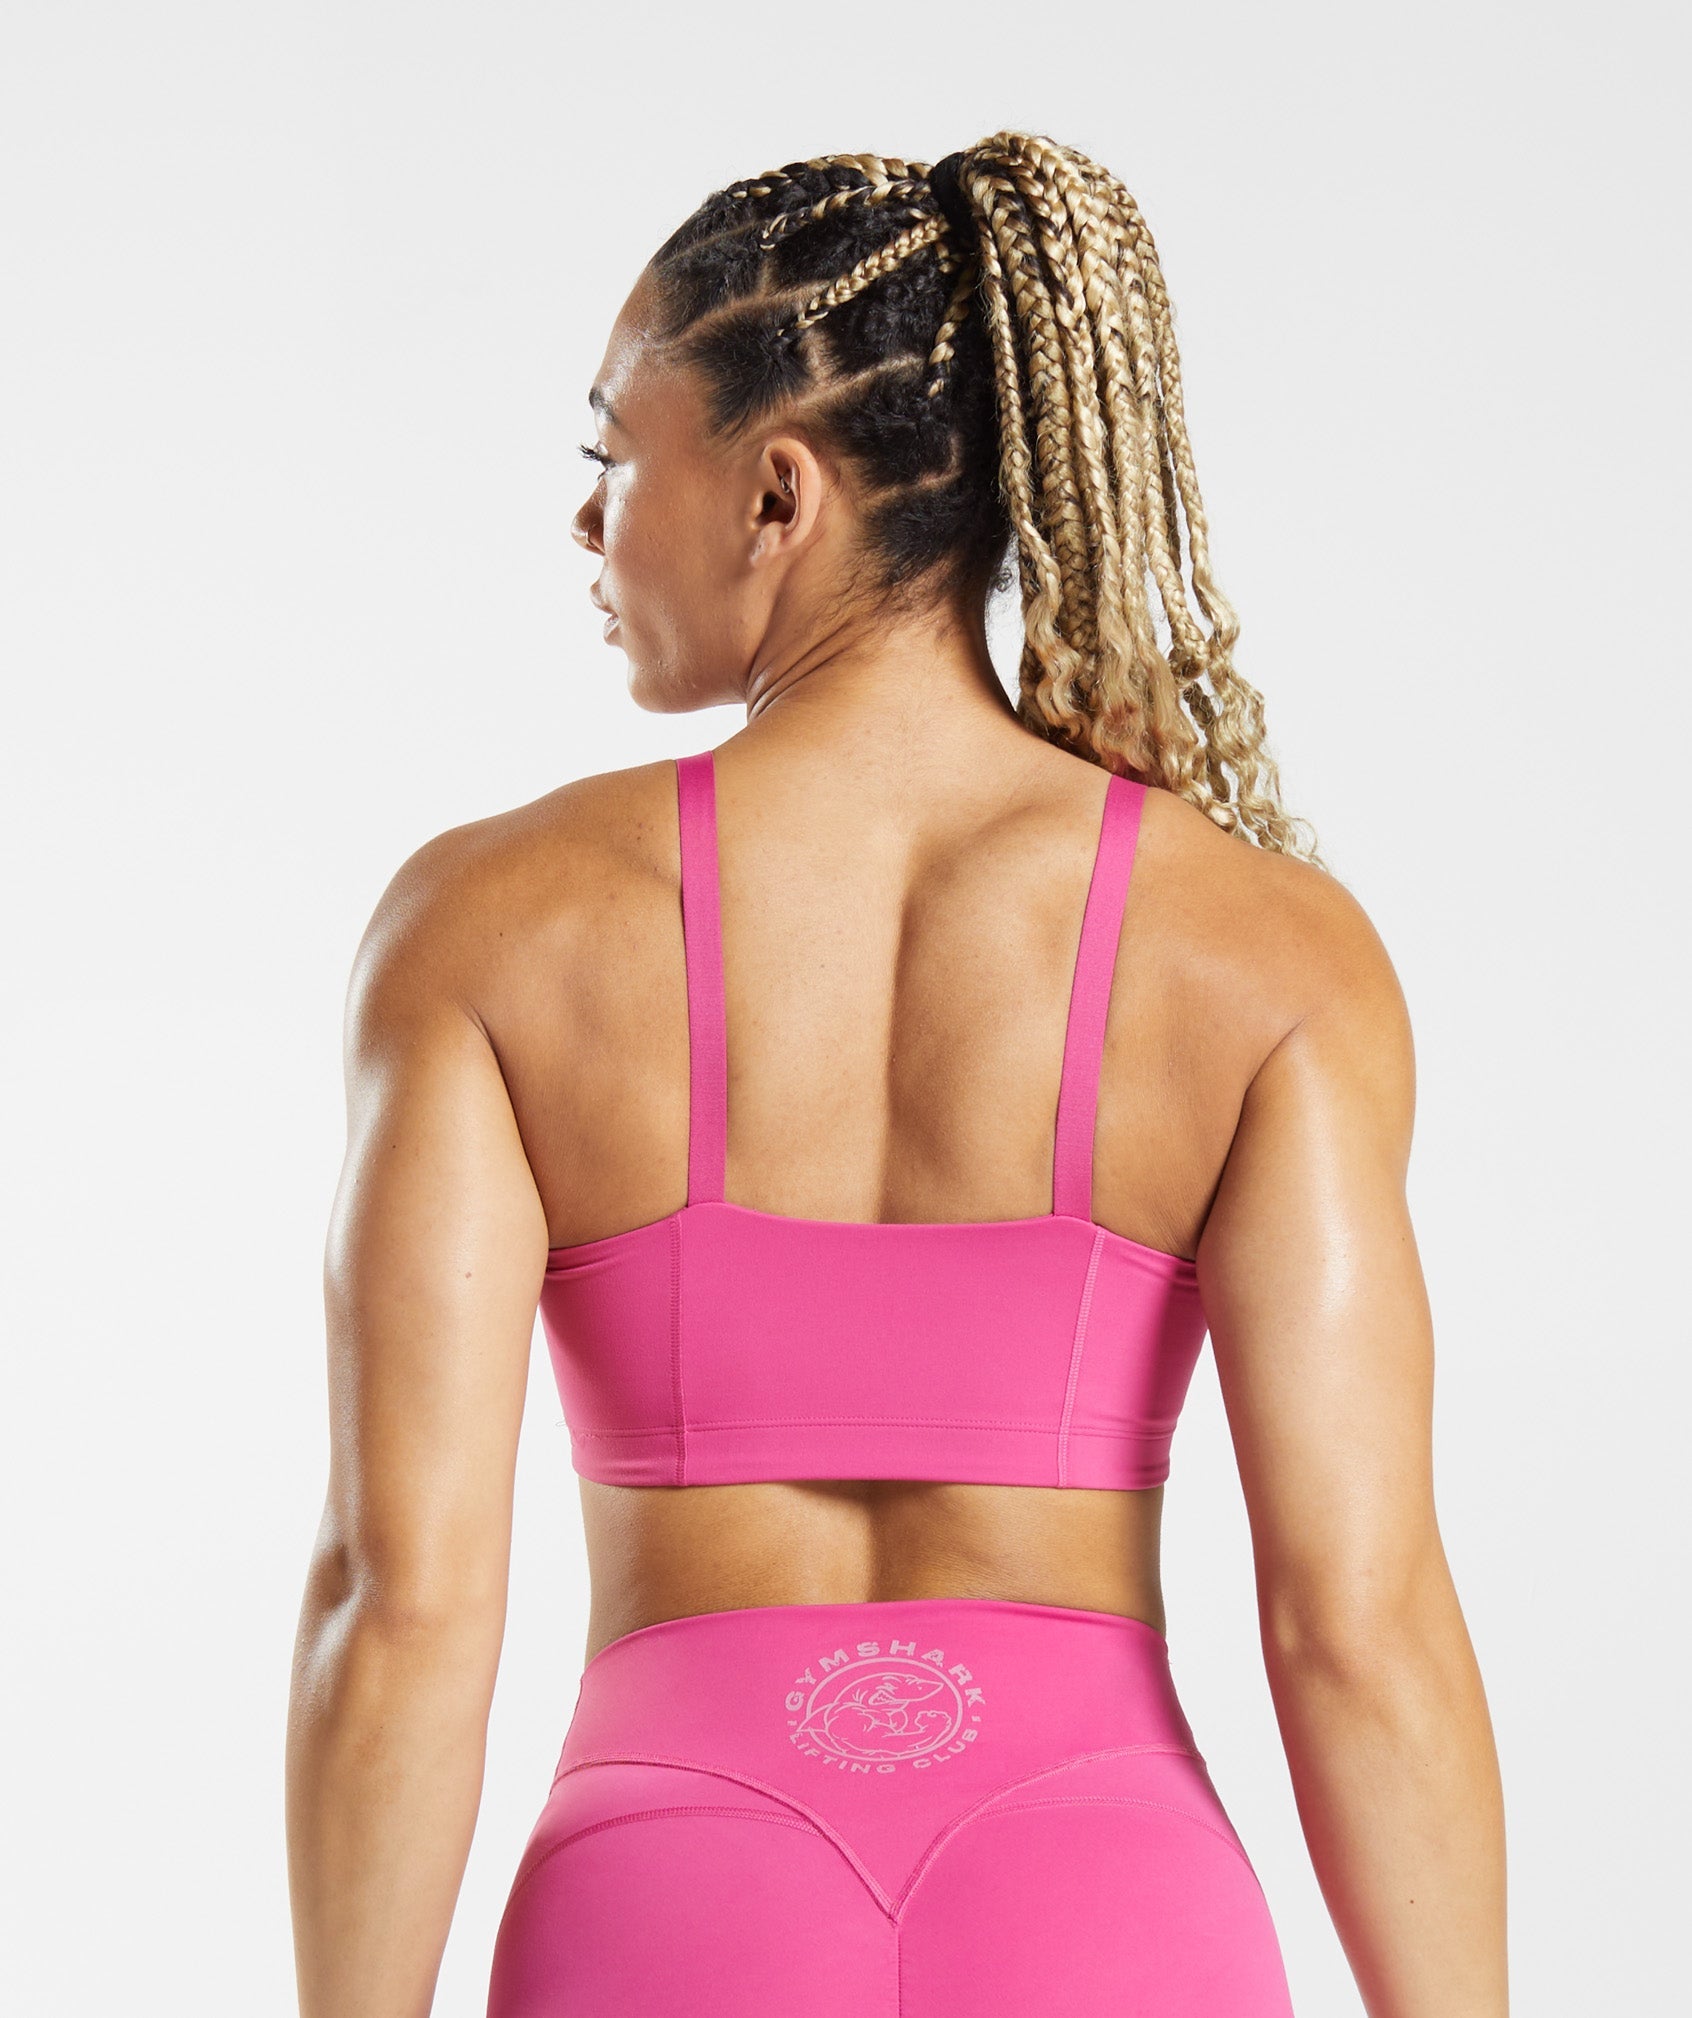 Gymshark Gymshark Womens Sports Bra Size Small Rose Pink Strappy